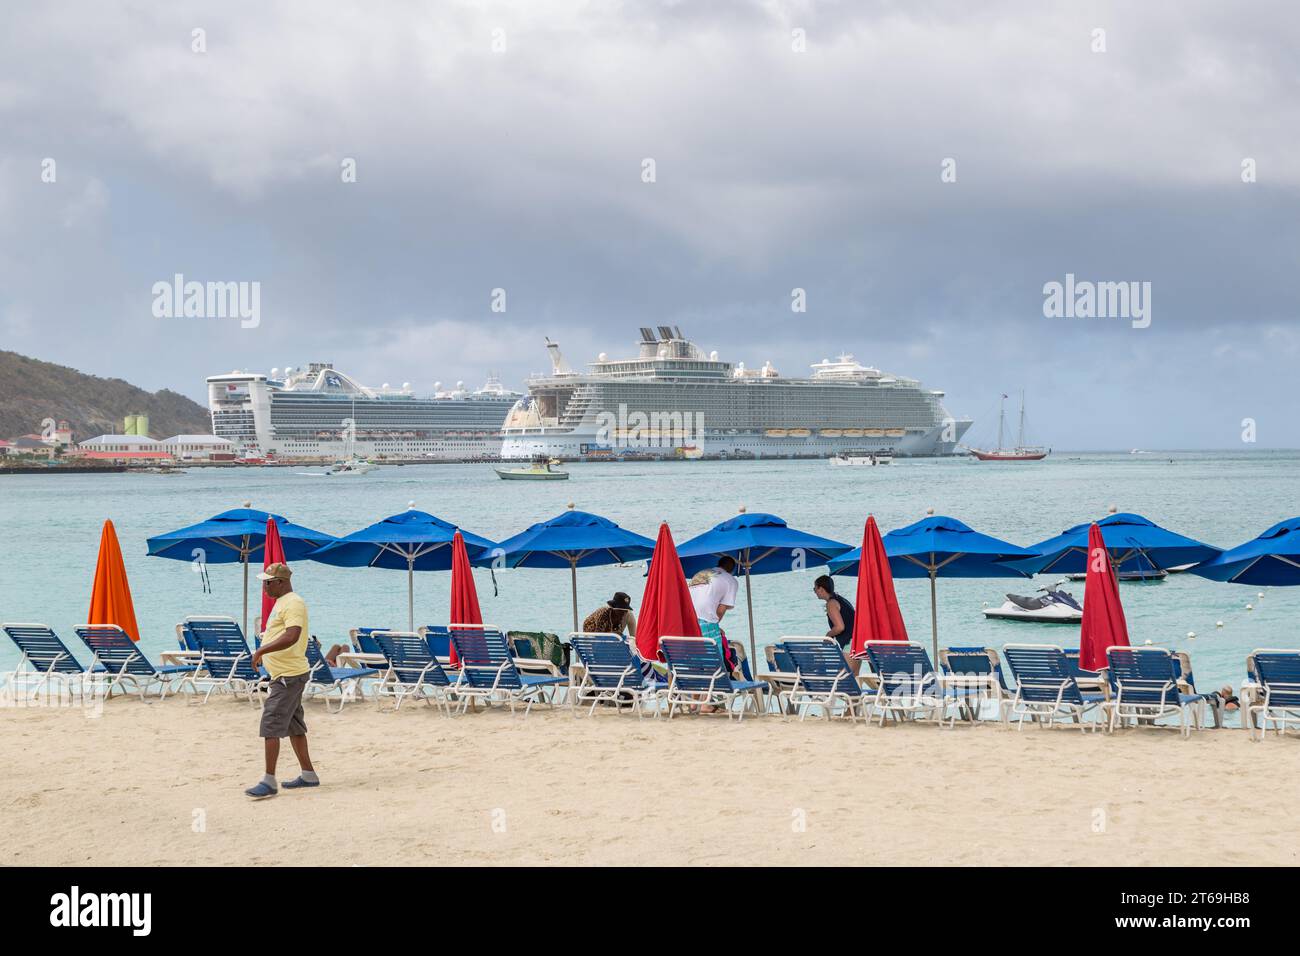 Tourists setting up on the beach on a rainy morning at the port of Phillipsburg, St. Maarten in the Caribbean Stock Photo